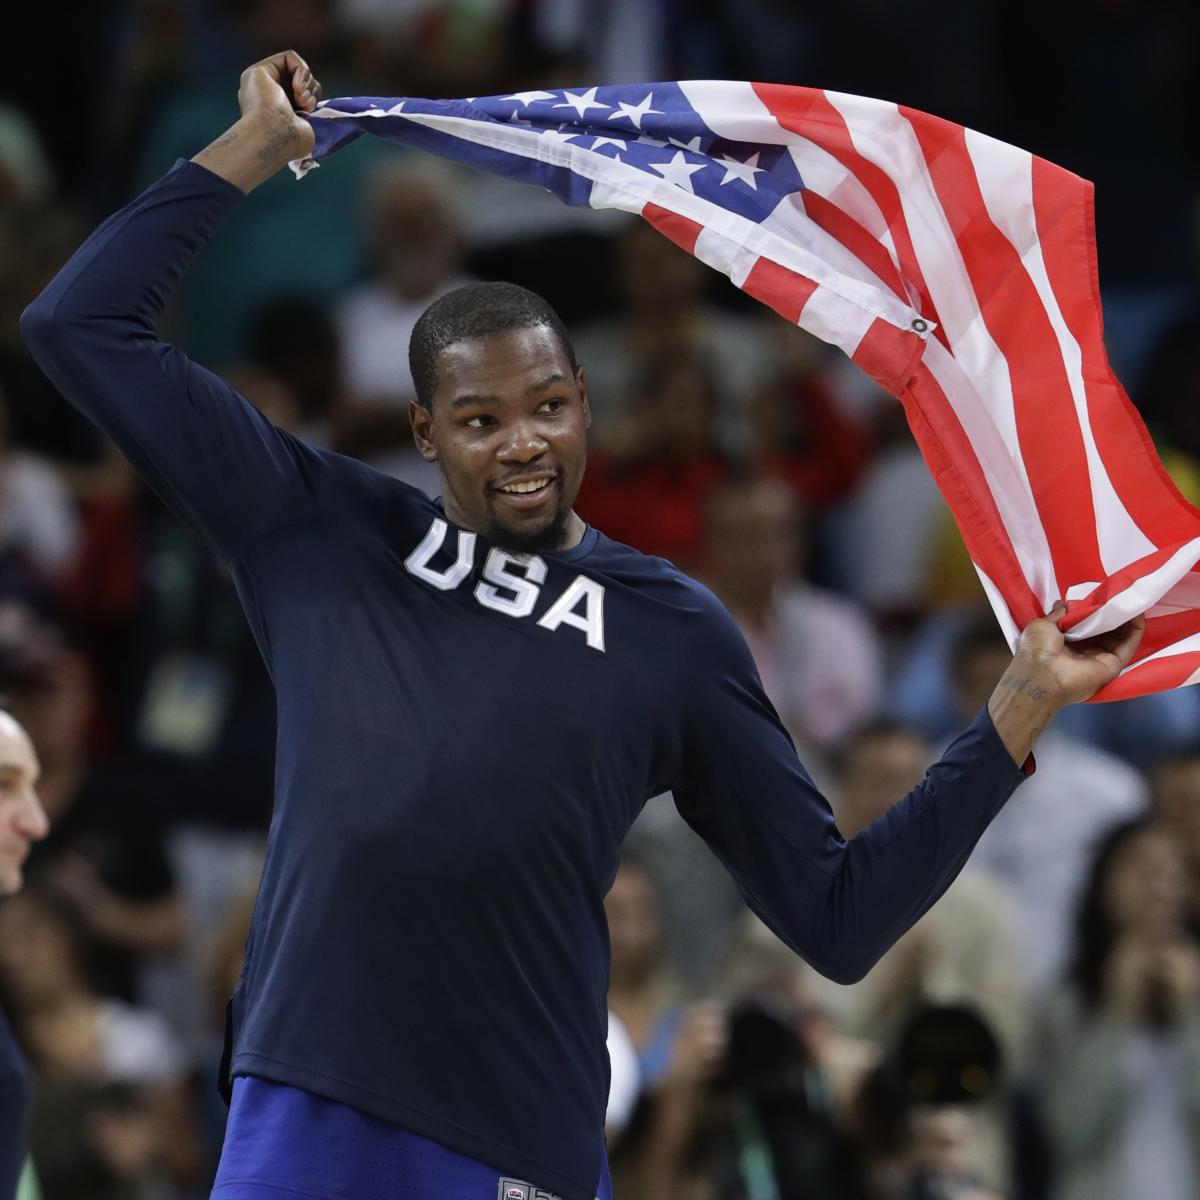 Durant Lillard And Usa Men S Basketball Team Roster For 2021 Tokyo Olympics News Update